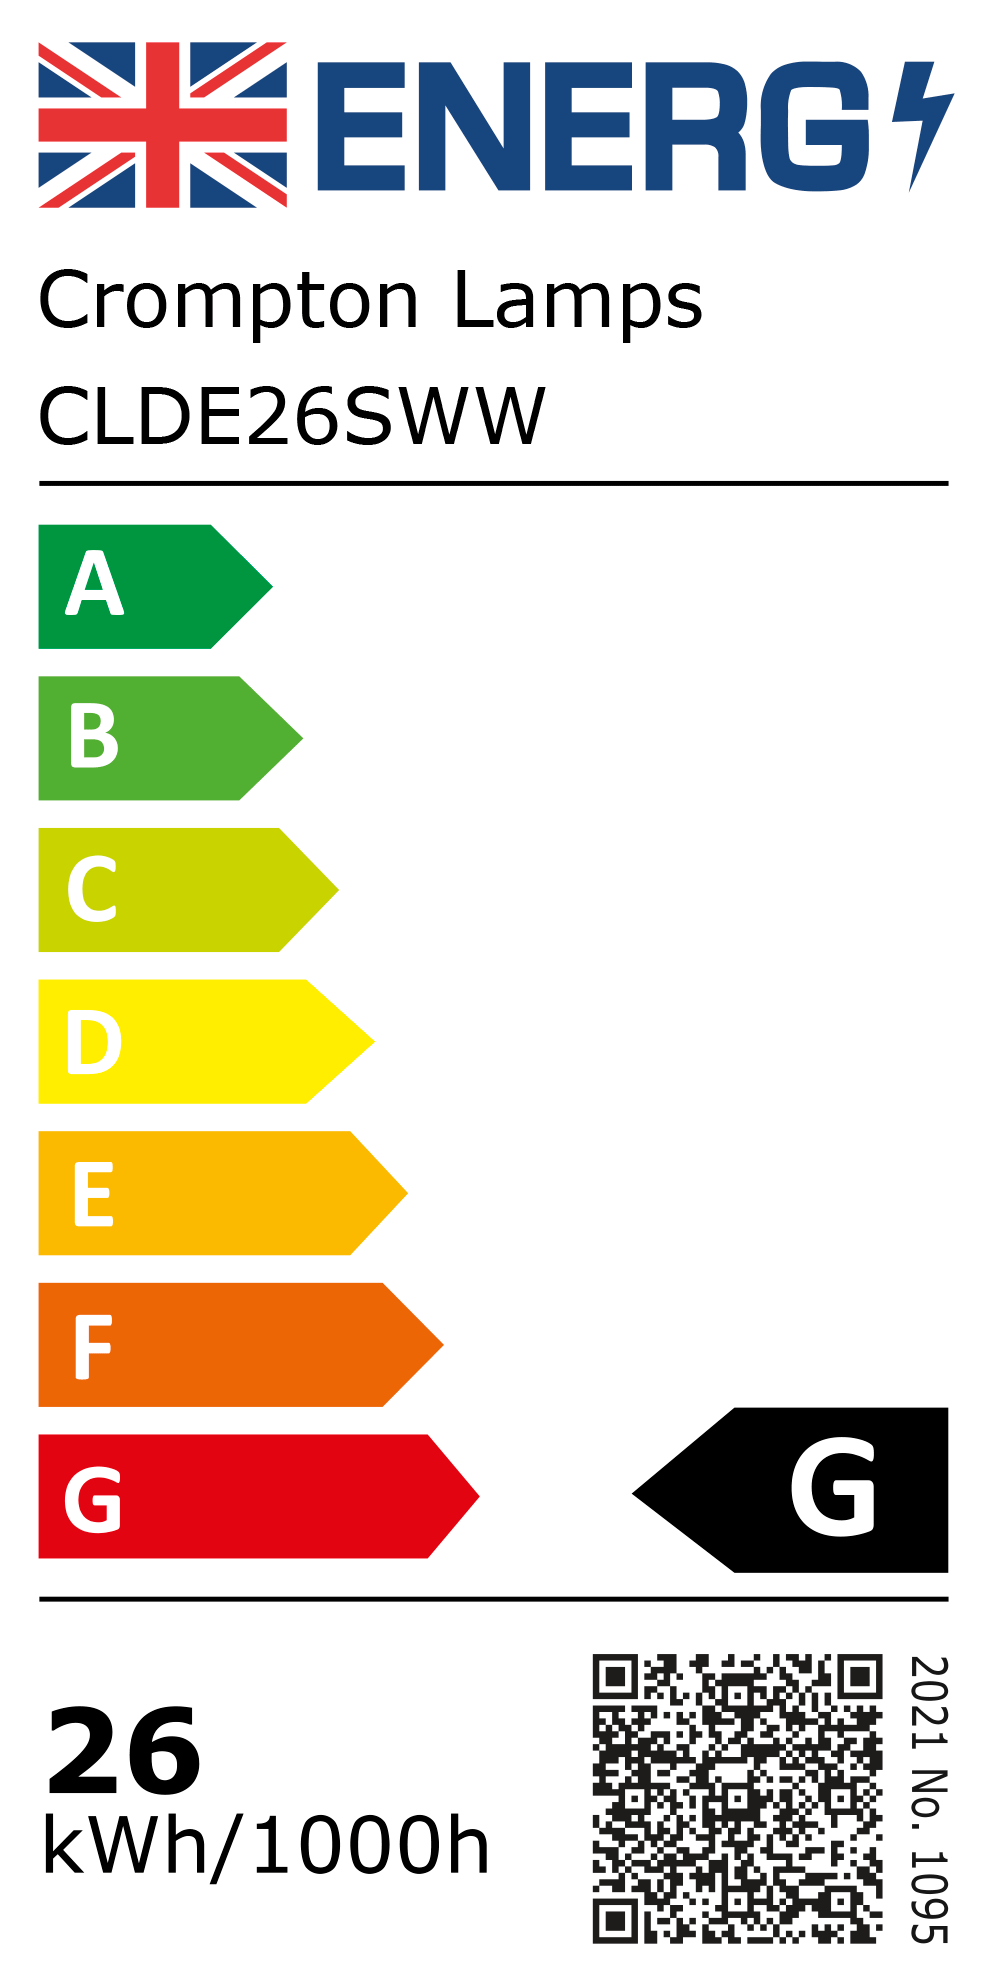 New 2021 Energy Rating Label: Stock Code CLDE26SWW